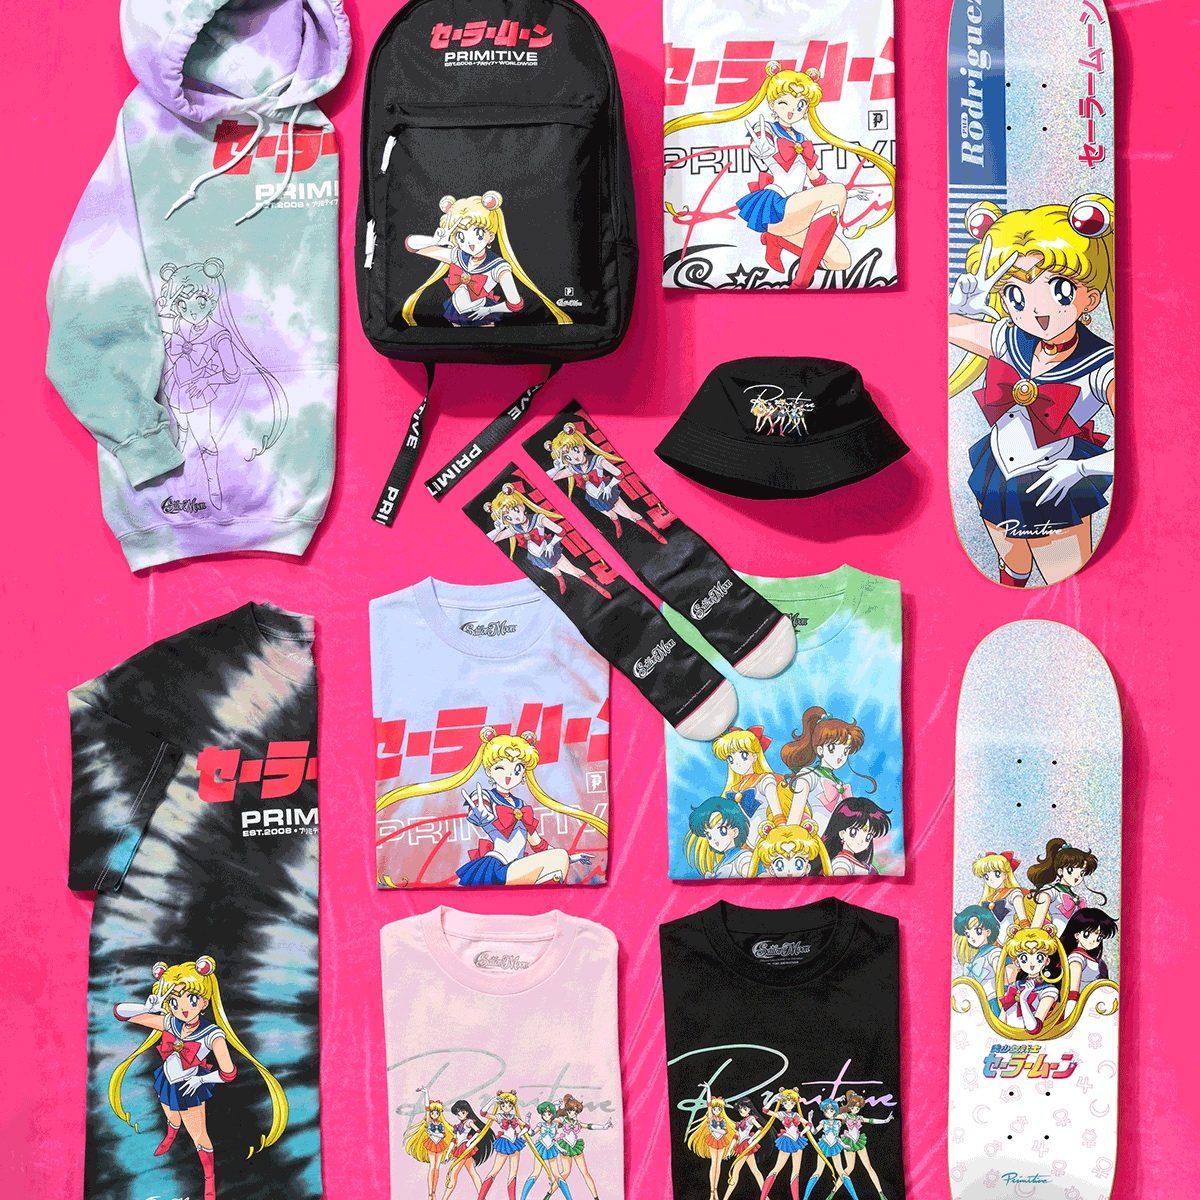 Primitive Skate Has Launched a New Sailor Moon Collection